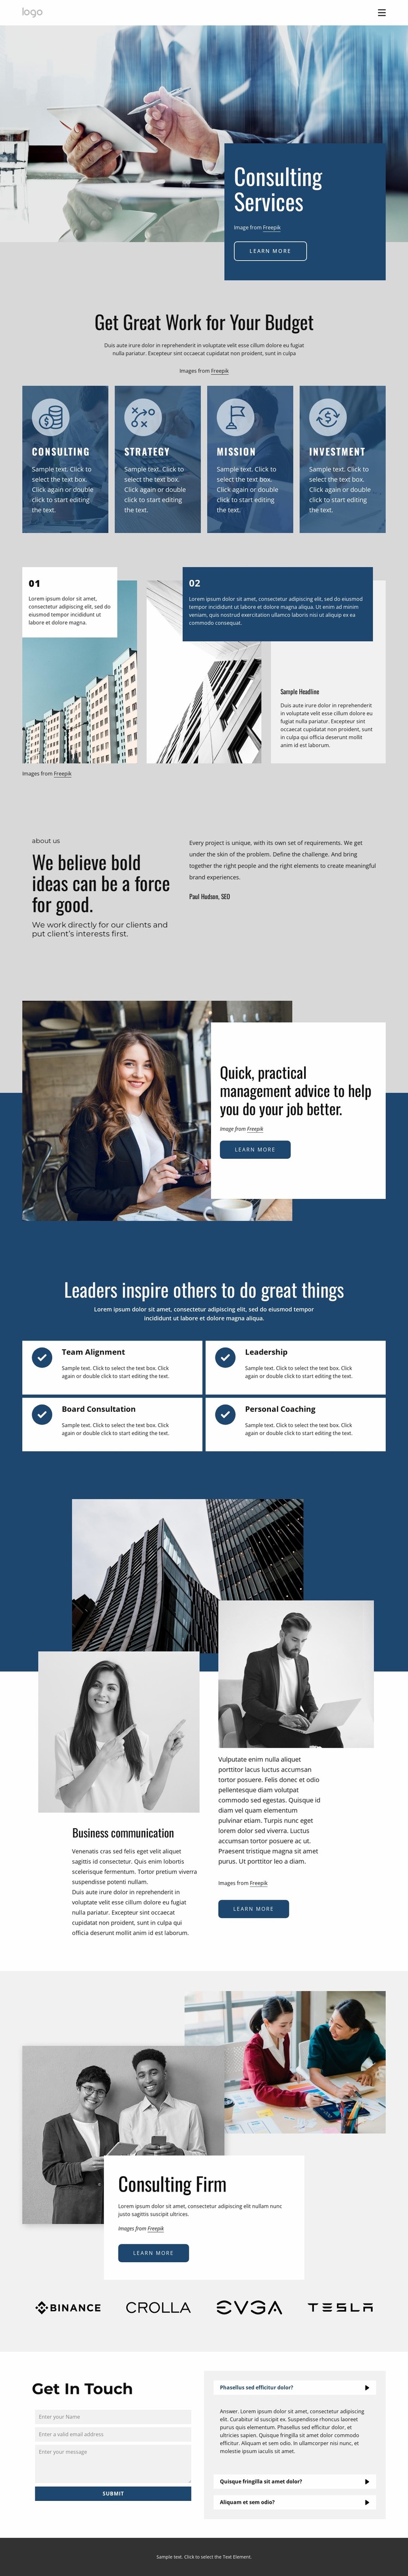 Professional consulting service firm Website Mockup